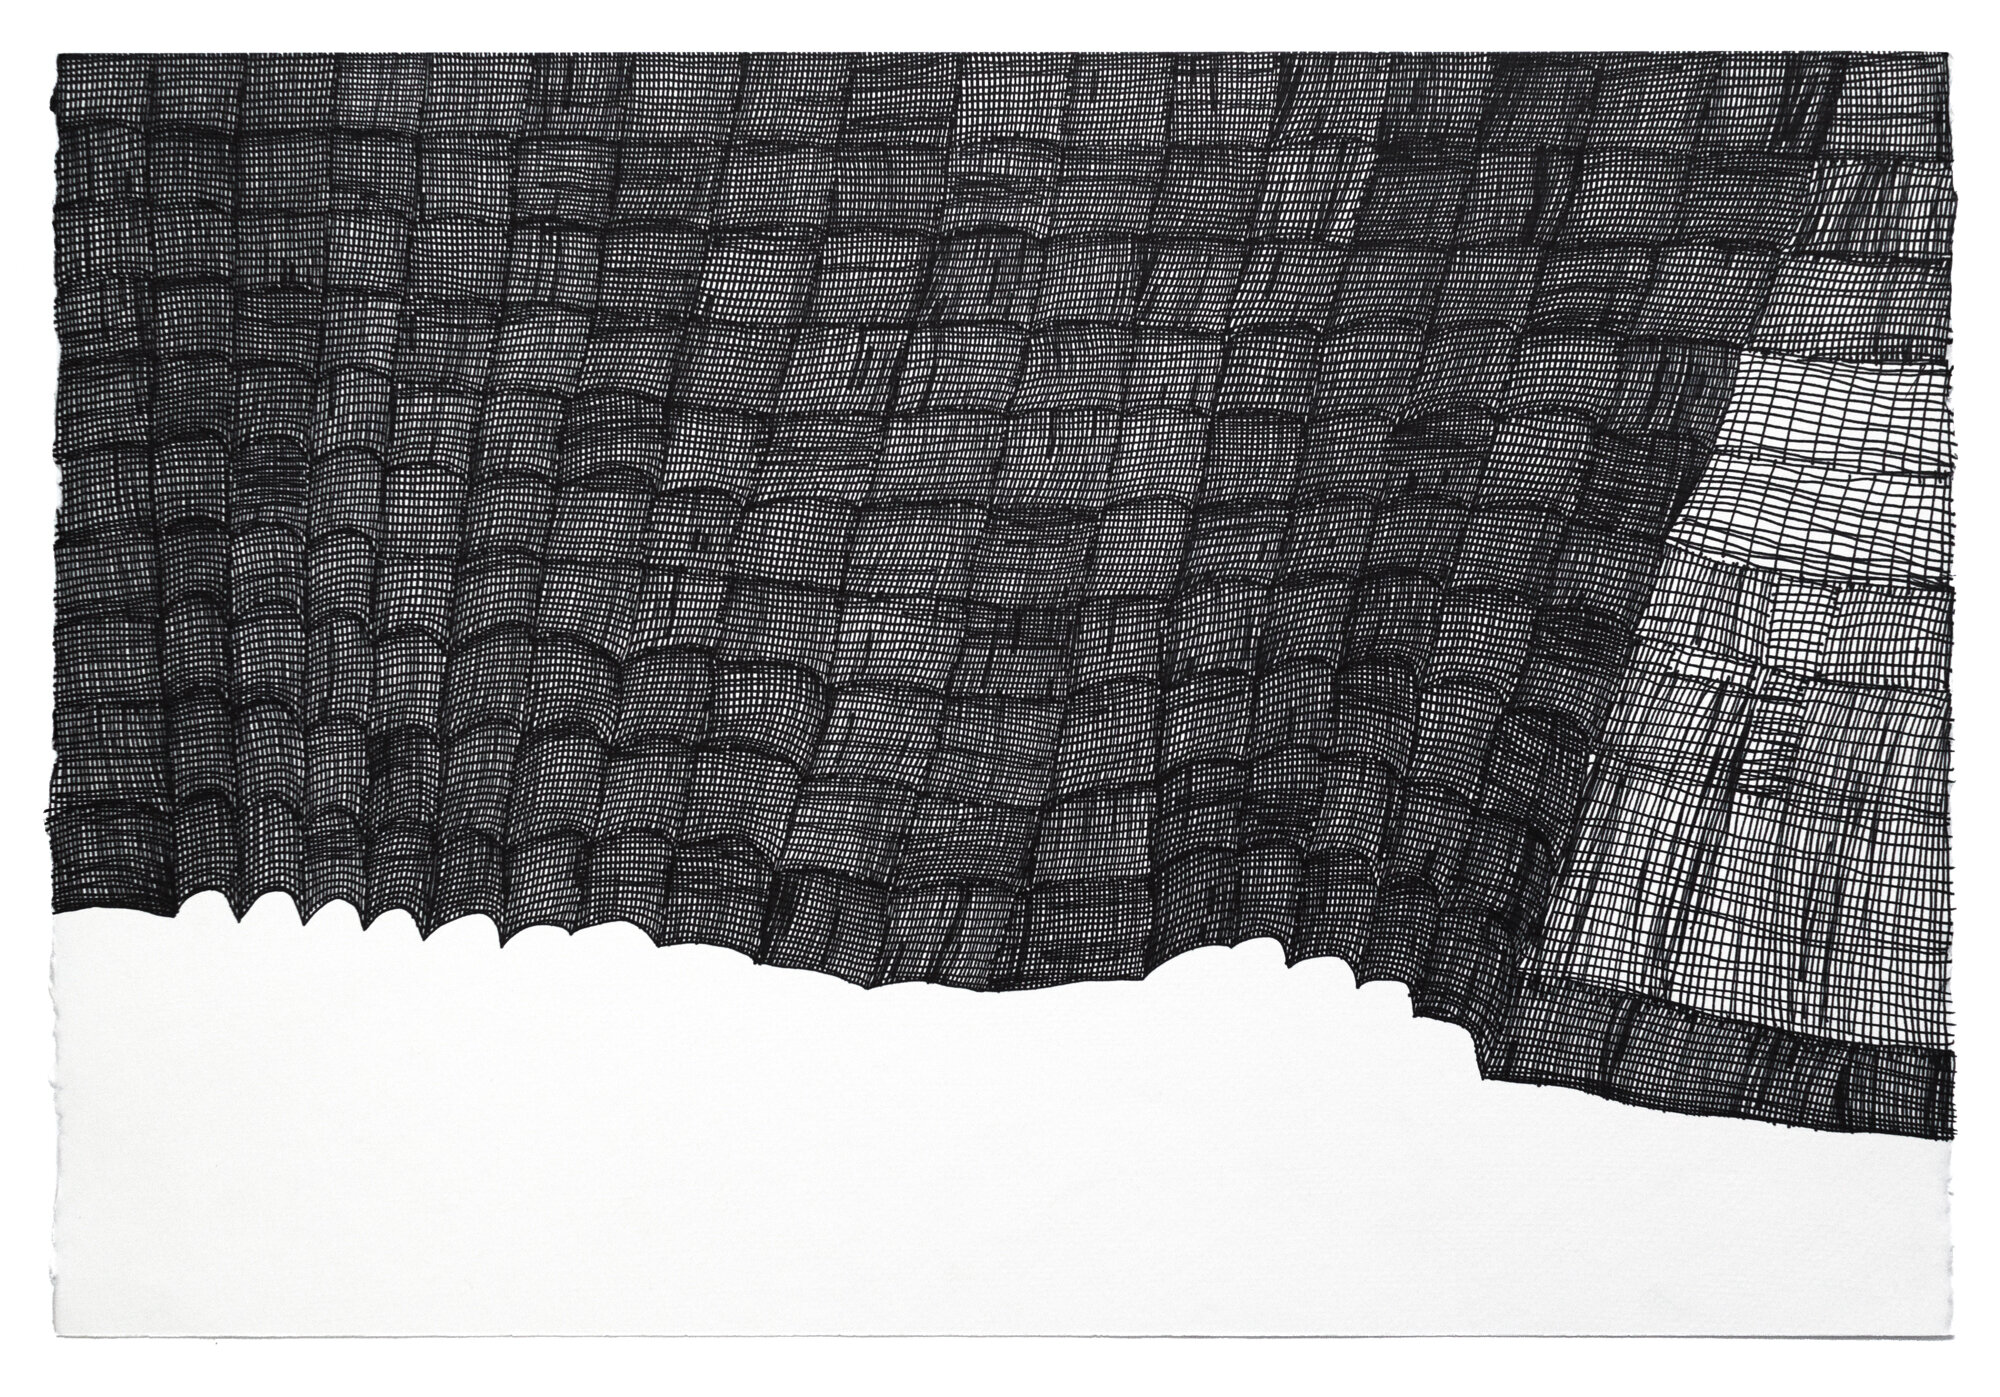 Susan Janow, Untitled (SJ 237), 2017, Ink on paper, 15 x 22.25 inches (Copy)